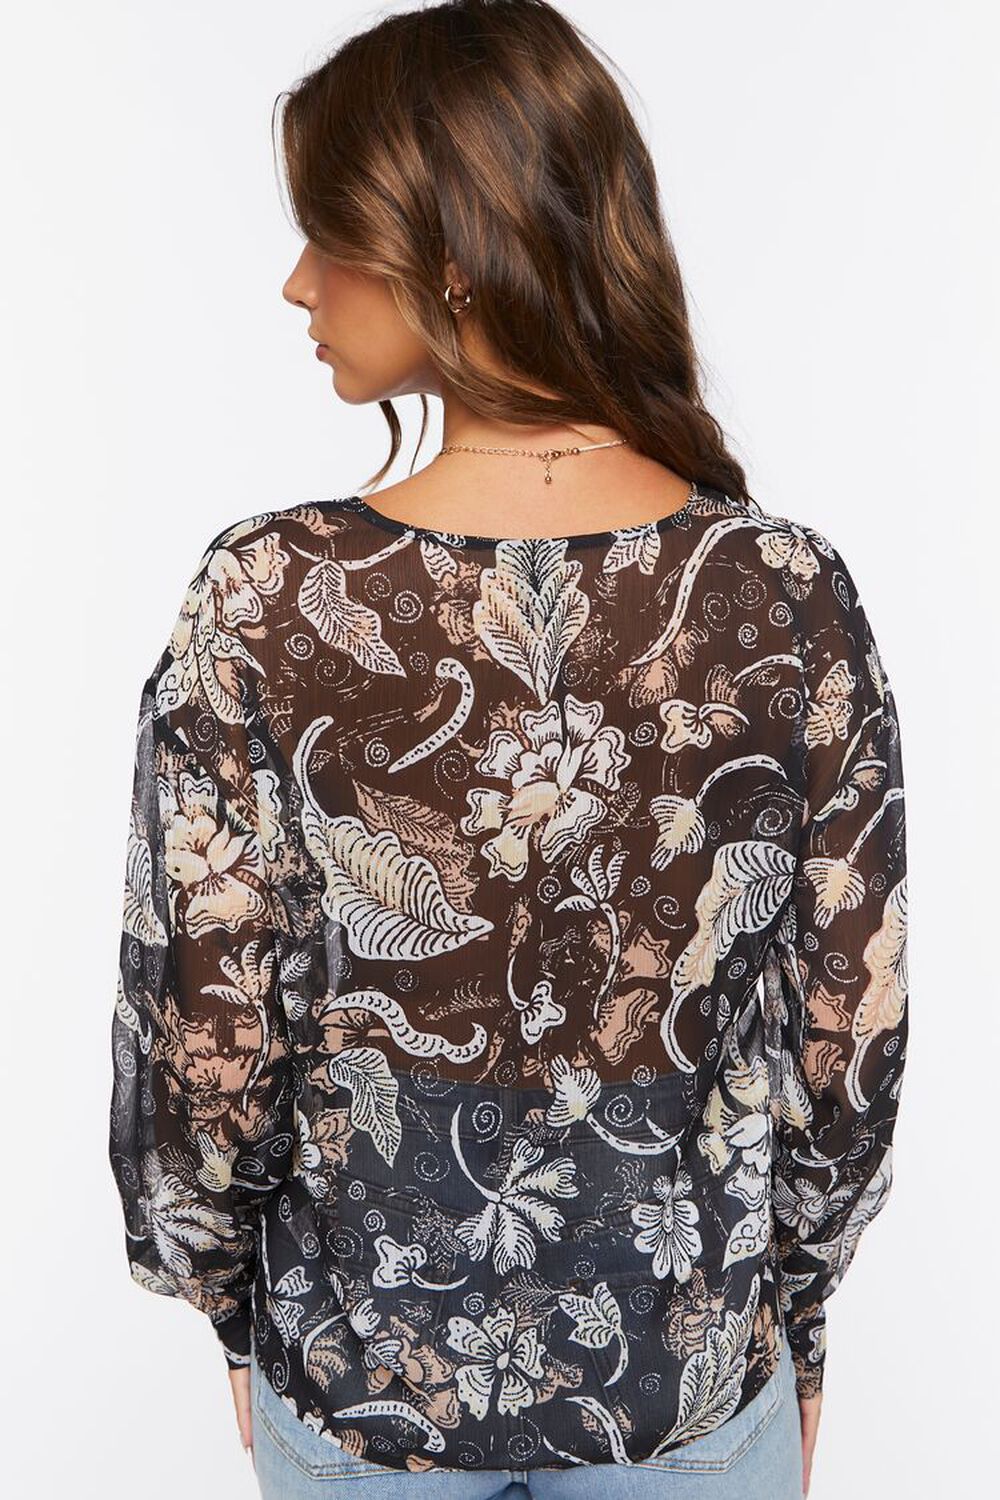 Chiffon Floral Print Lace-Up Top, image 3